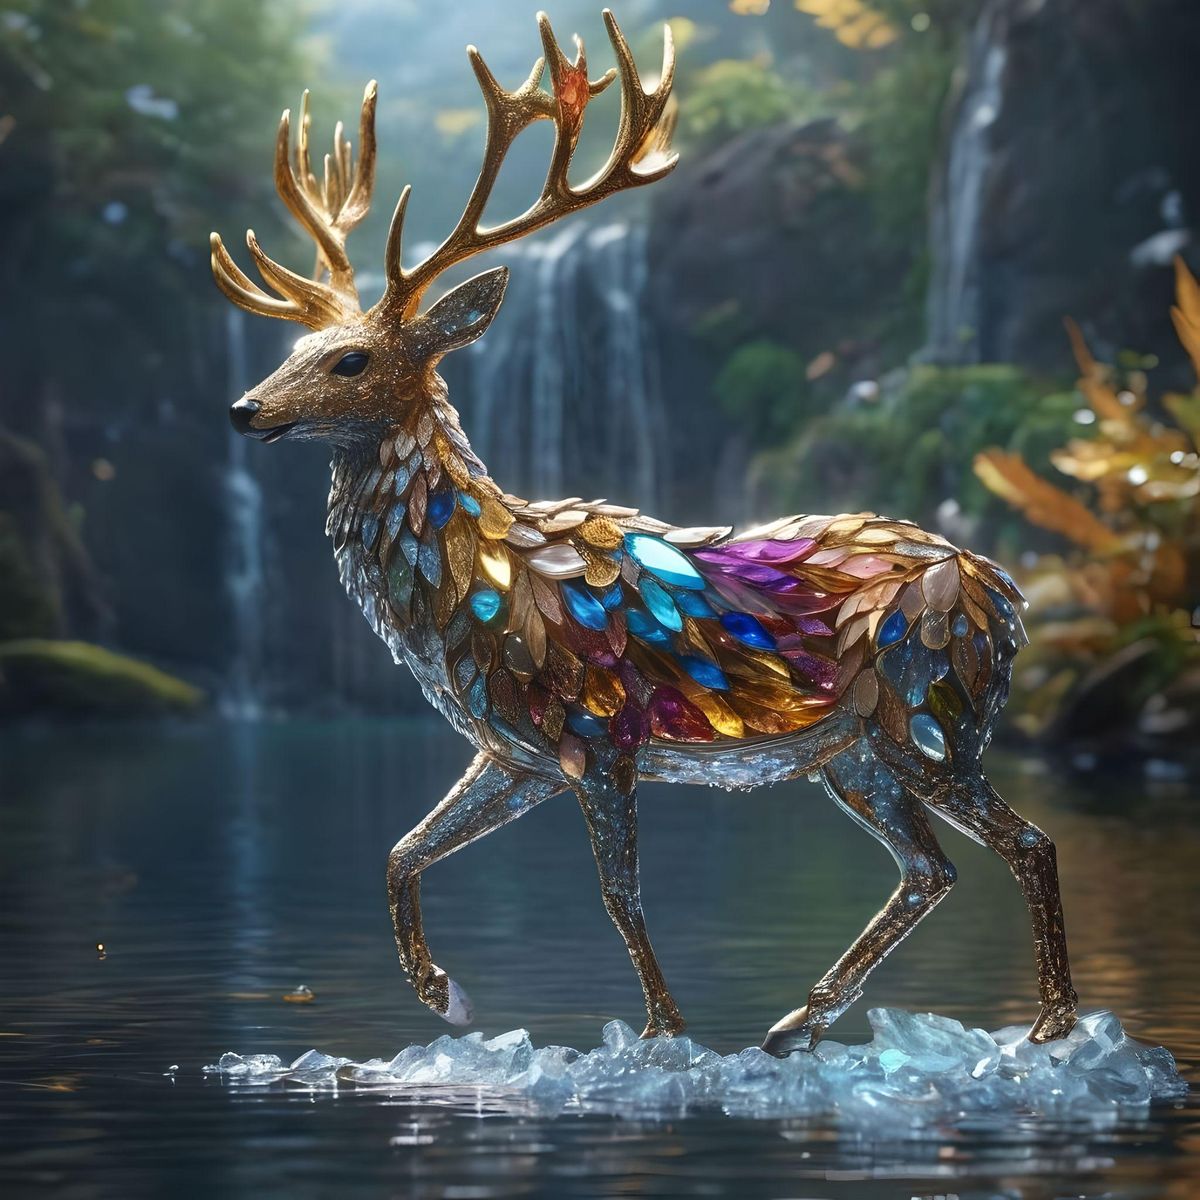 A dazzling mythical deer with phoenix feathers gliding on the most beautiful river of gems and crystals.